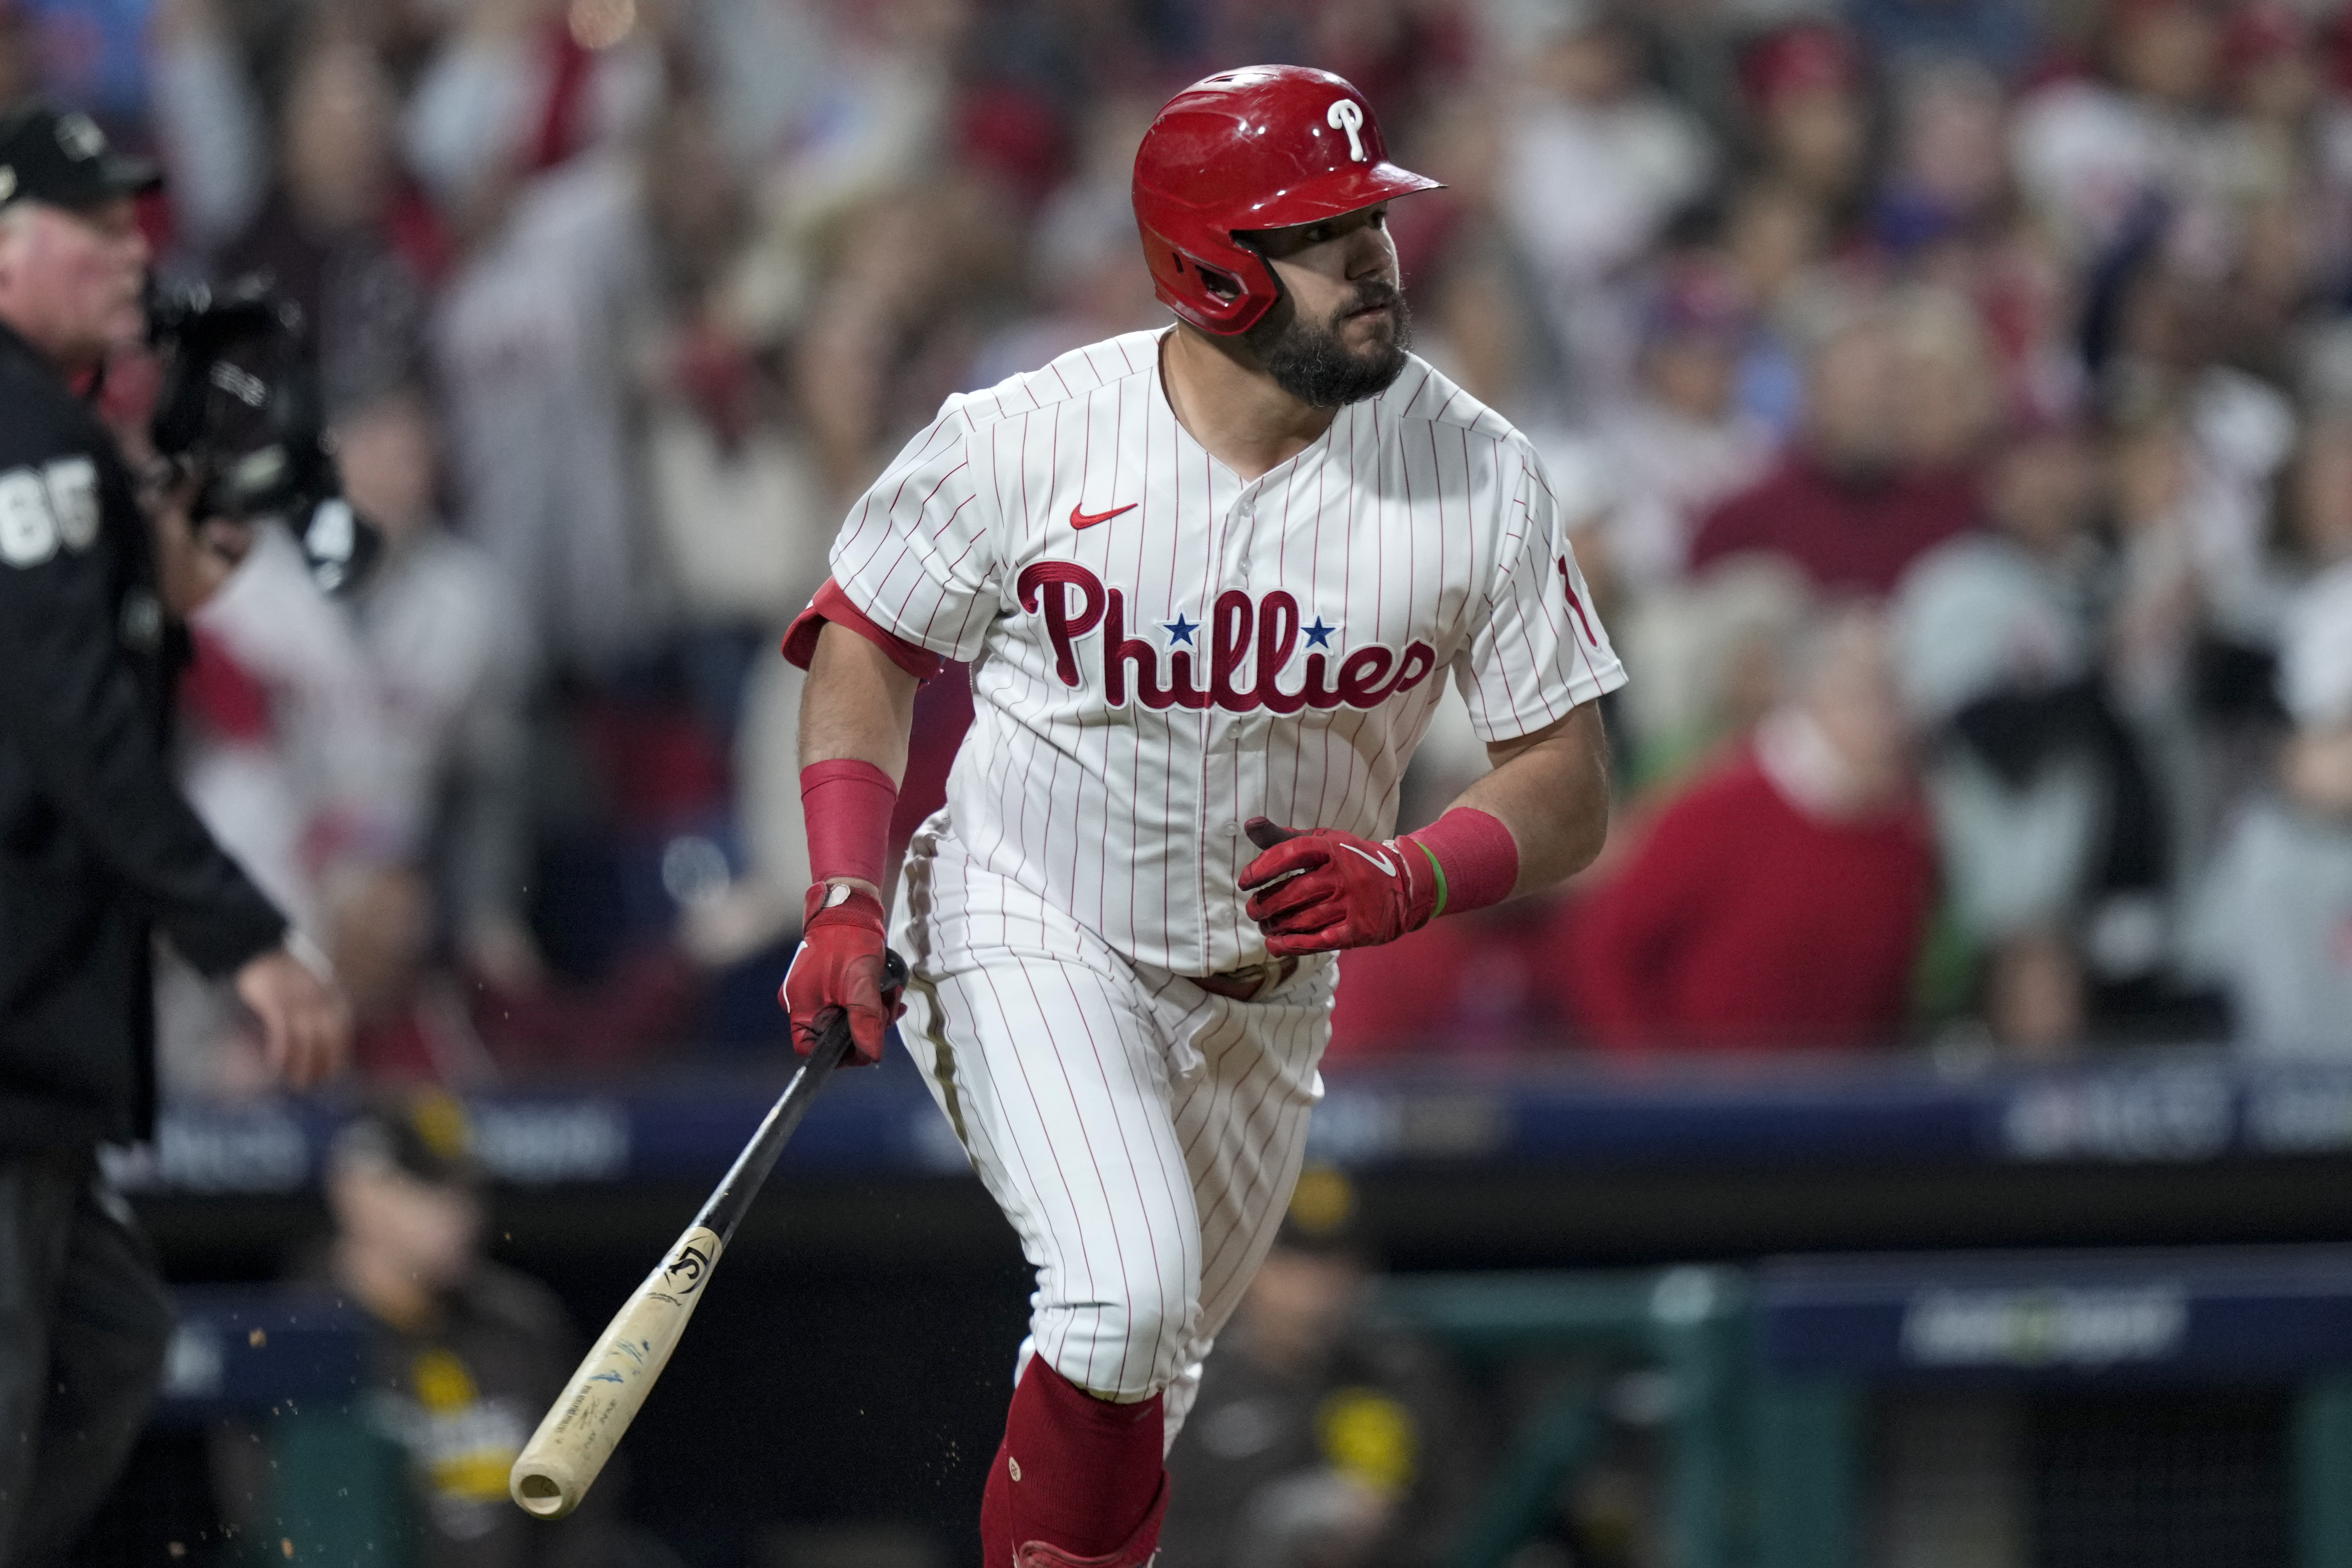 Philly Sports Playback: The 1980 Phillies